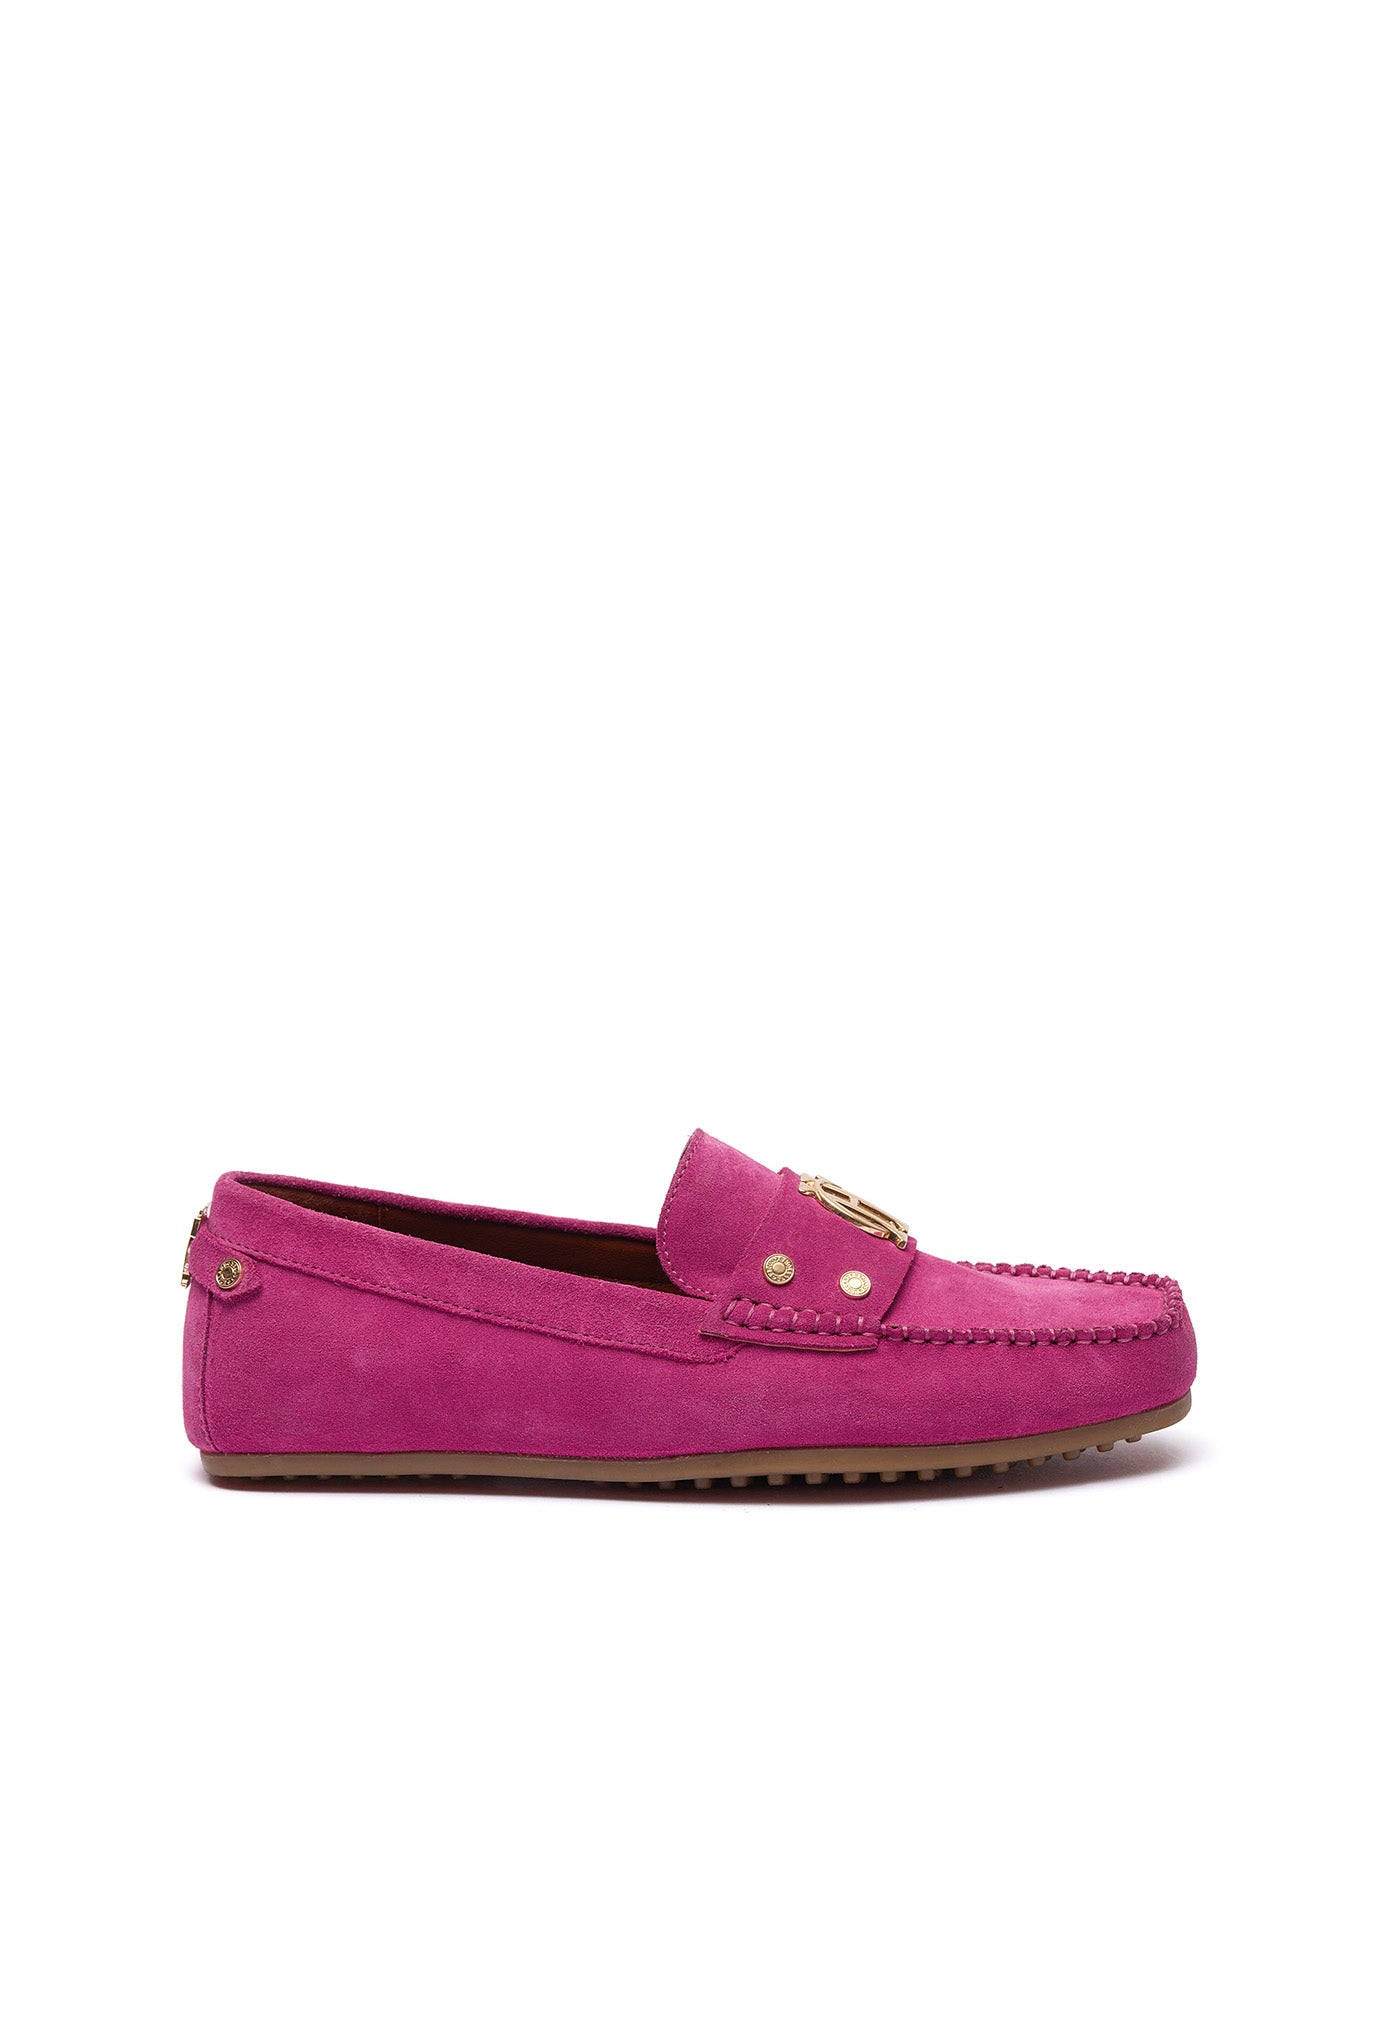 The Driving Loafer - Fushia sold by Angel Divine